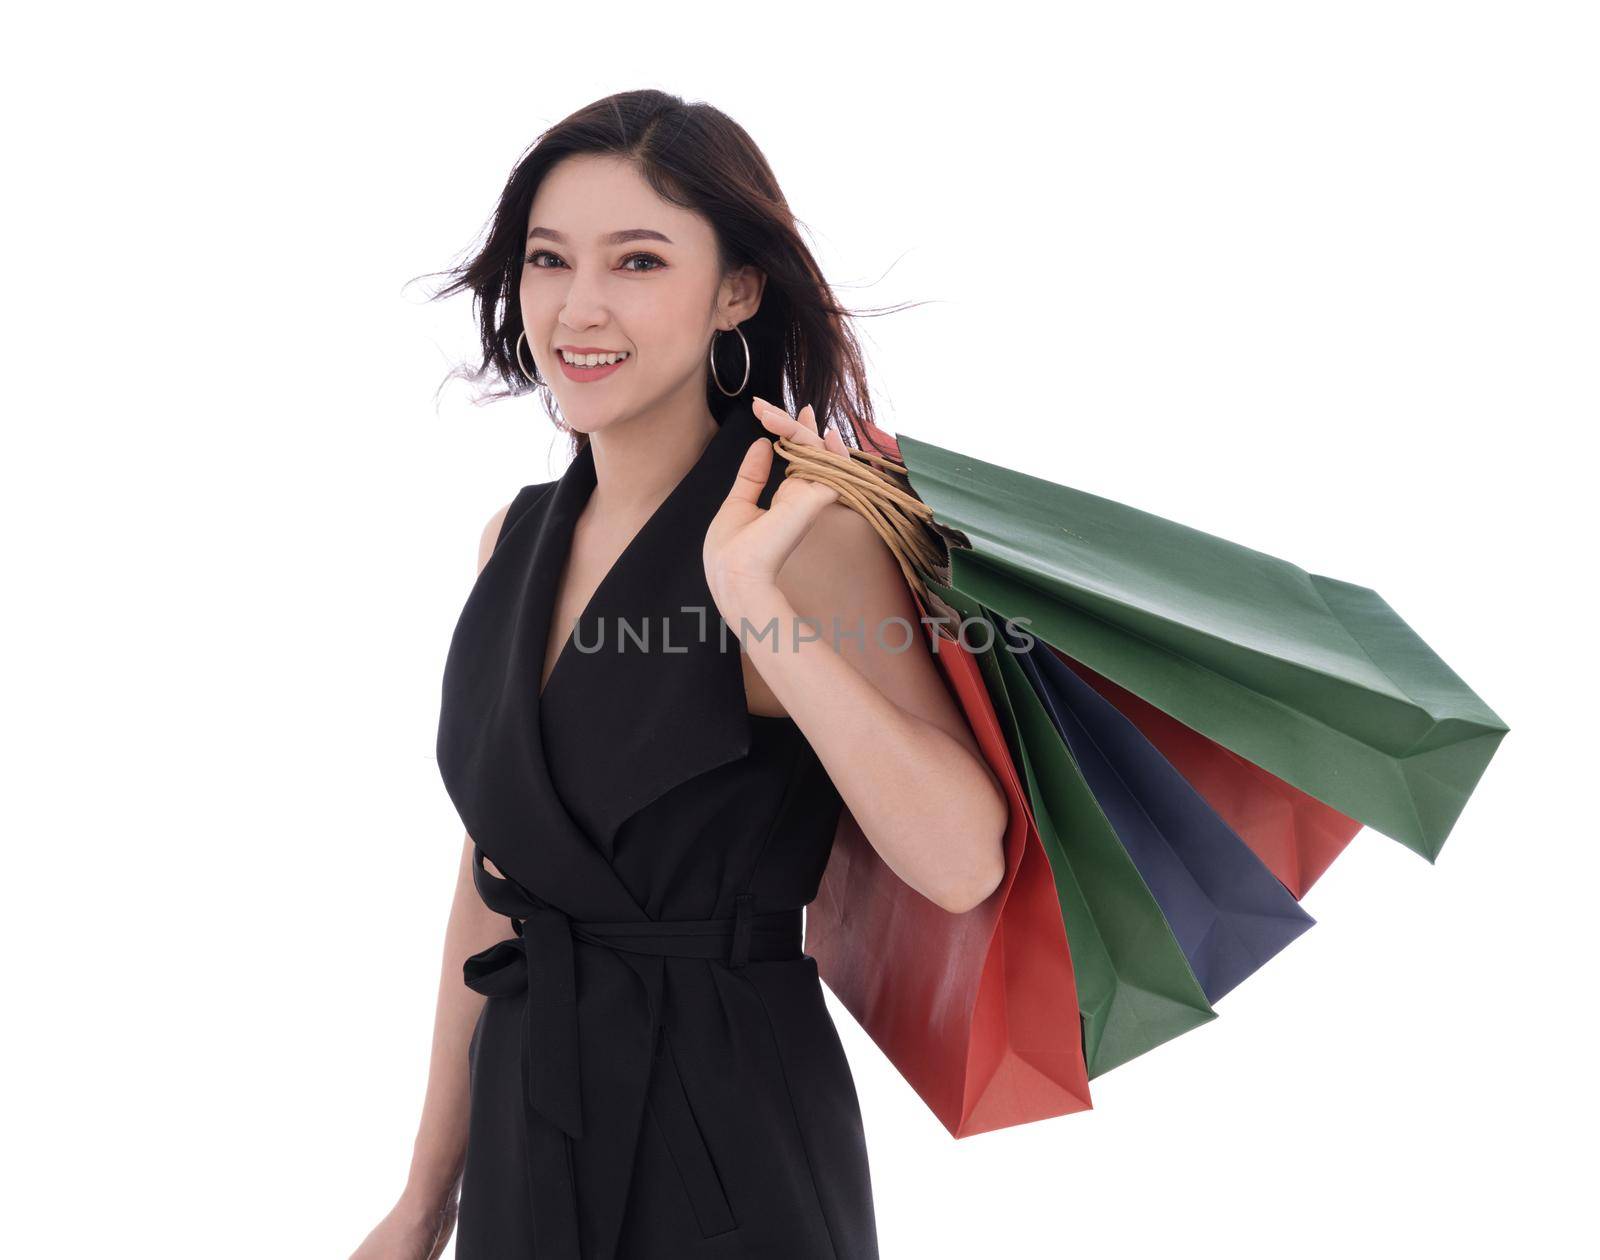 cheerful young woman holding shopping bag isolated on white background by geargodz